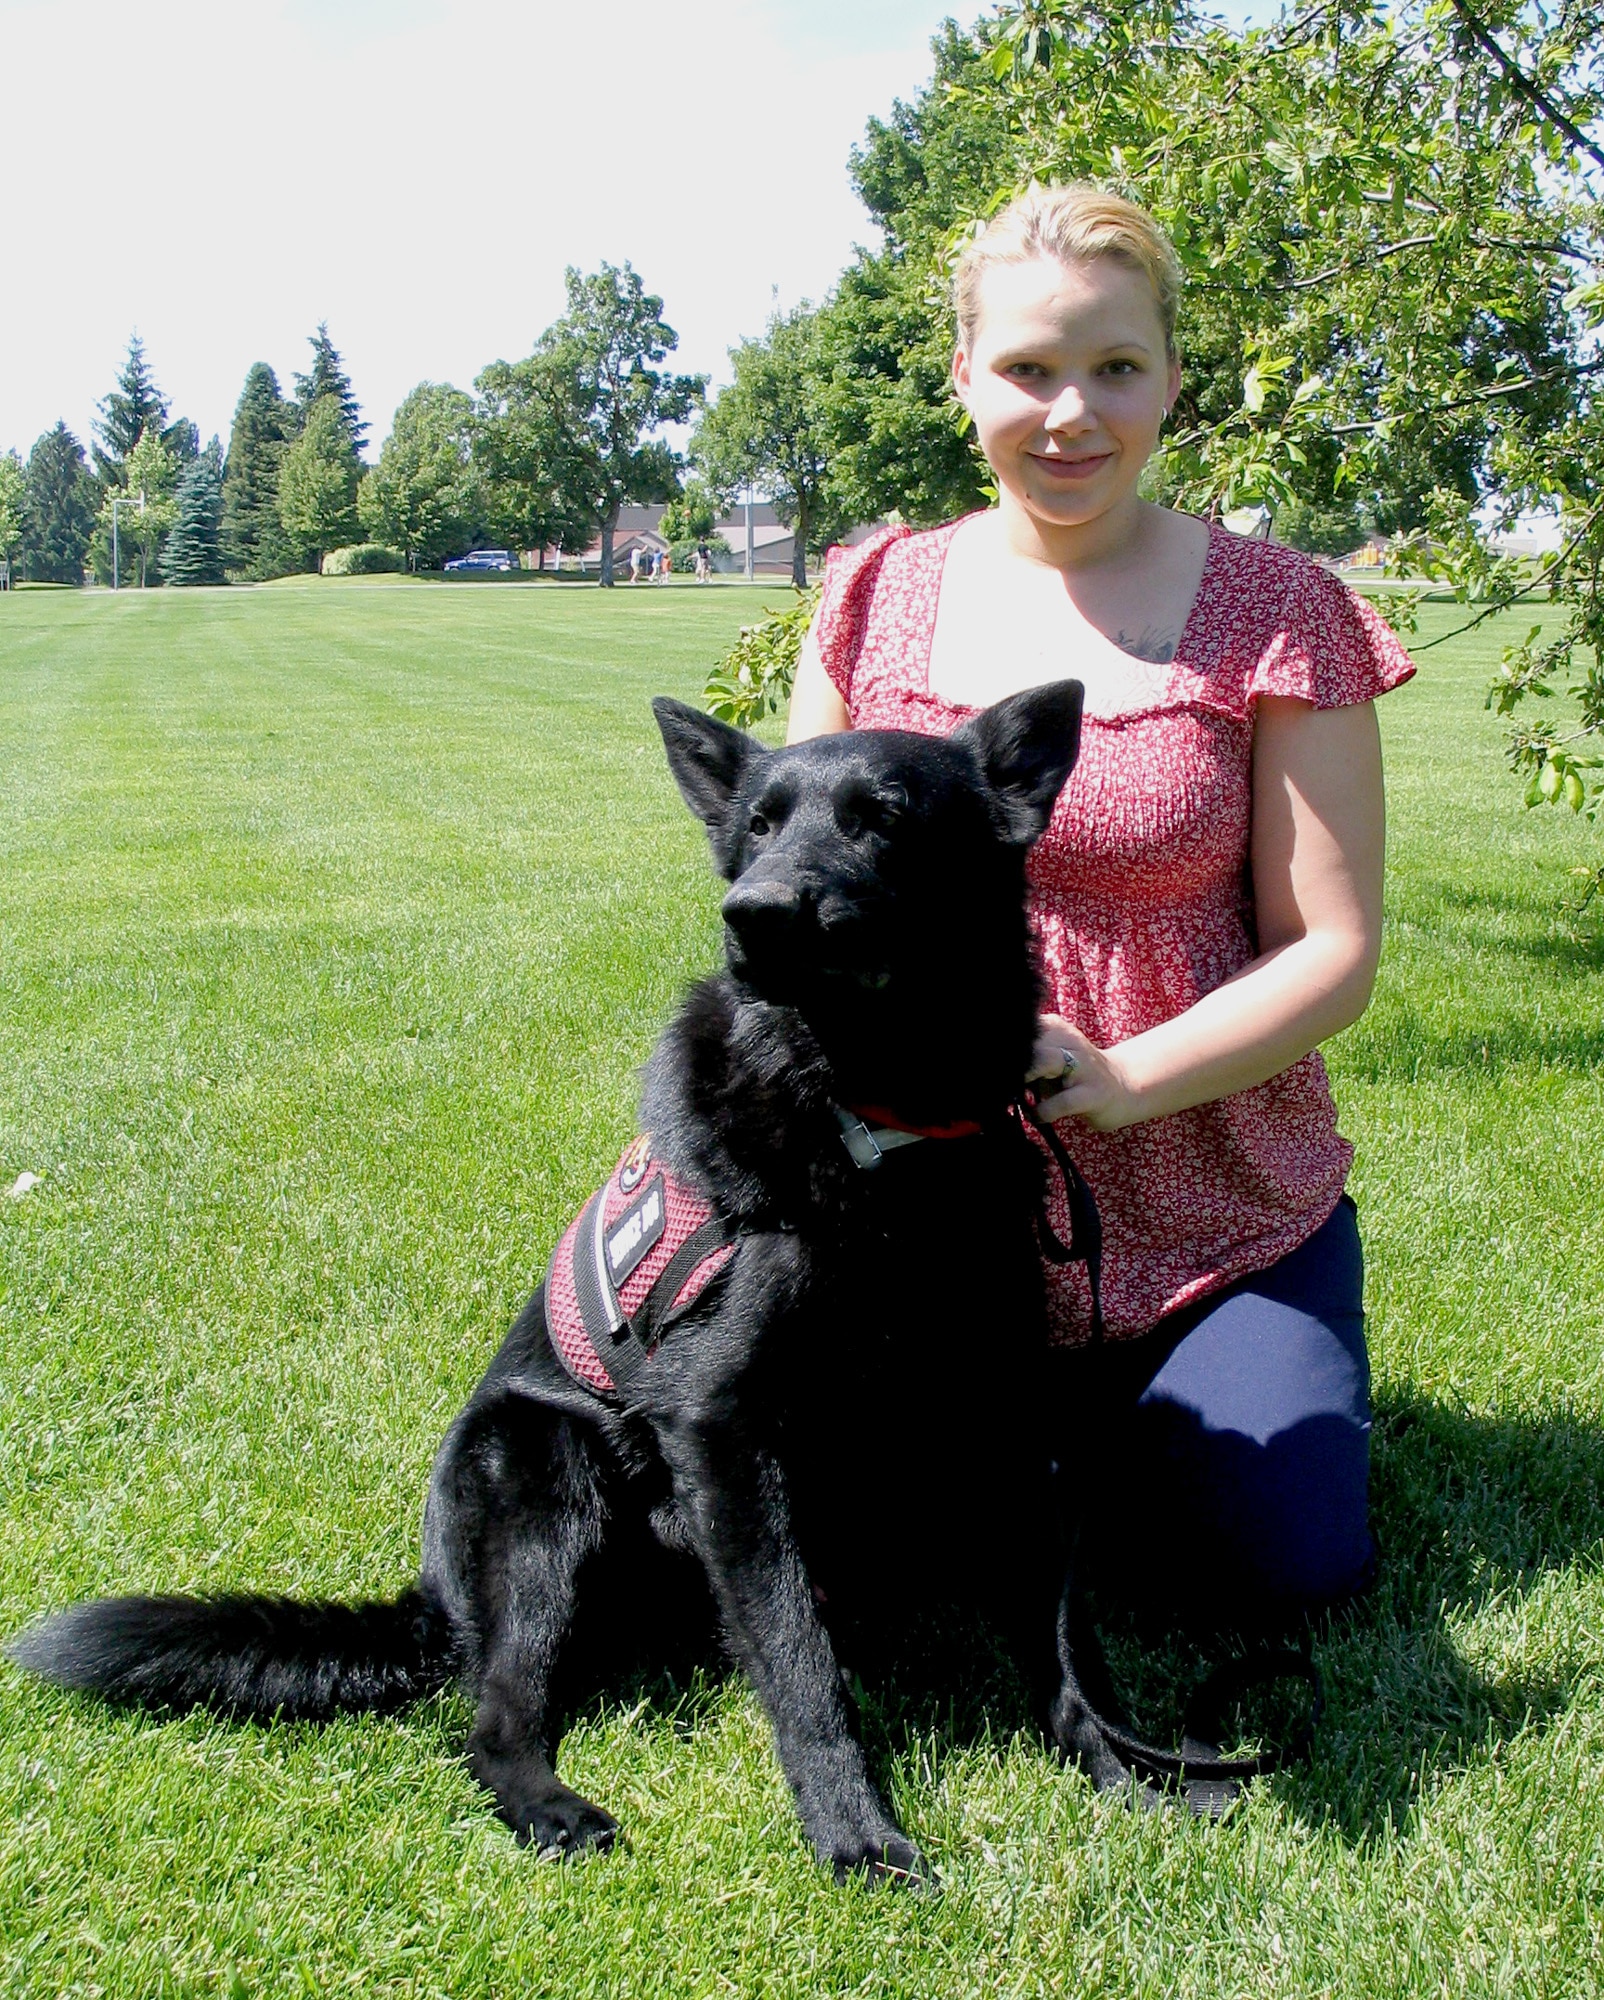 FAIRCHILD AIR FORCE BASE, Wash. – Kimberly Hawks kneels with her medical alert dog, Zeuss, an 18-month-old German Shepherd. Kimberly obtained Zeuss from a breeder in Seattle, Wash., after detailed research about medical dogs and their services. Zeuss comes from an accomplished canine family; his parents are both champion show dogs, and his brother is a drug detection dog in Arizona. (U.S. Air Force photo/ Staff Sgt. Connie L. Bias)